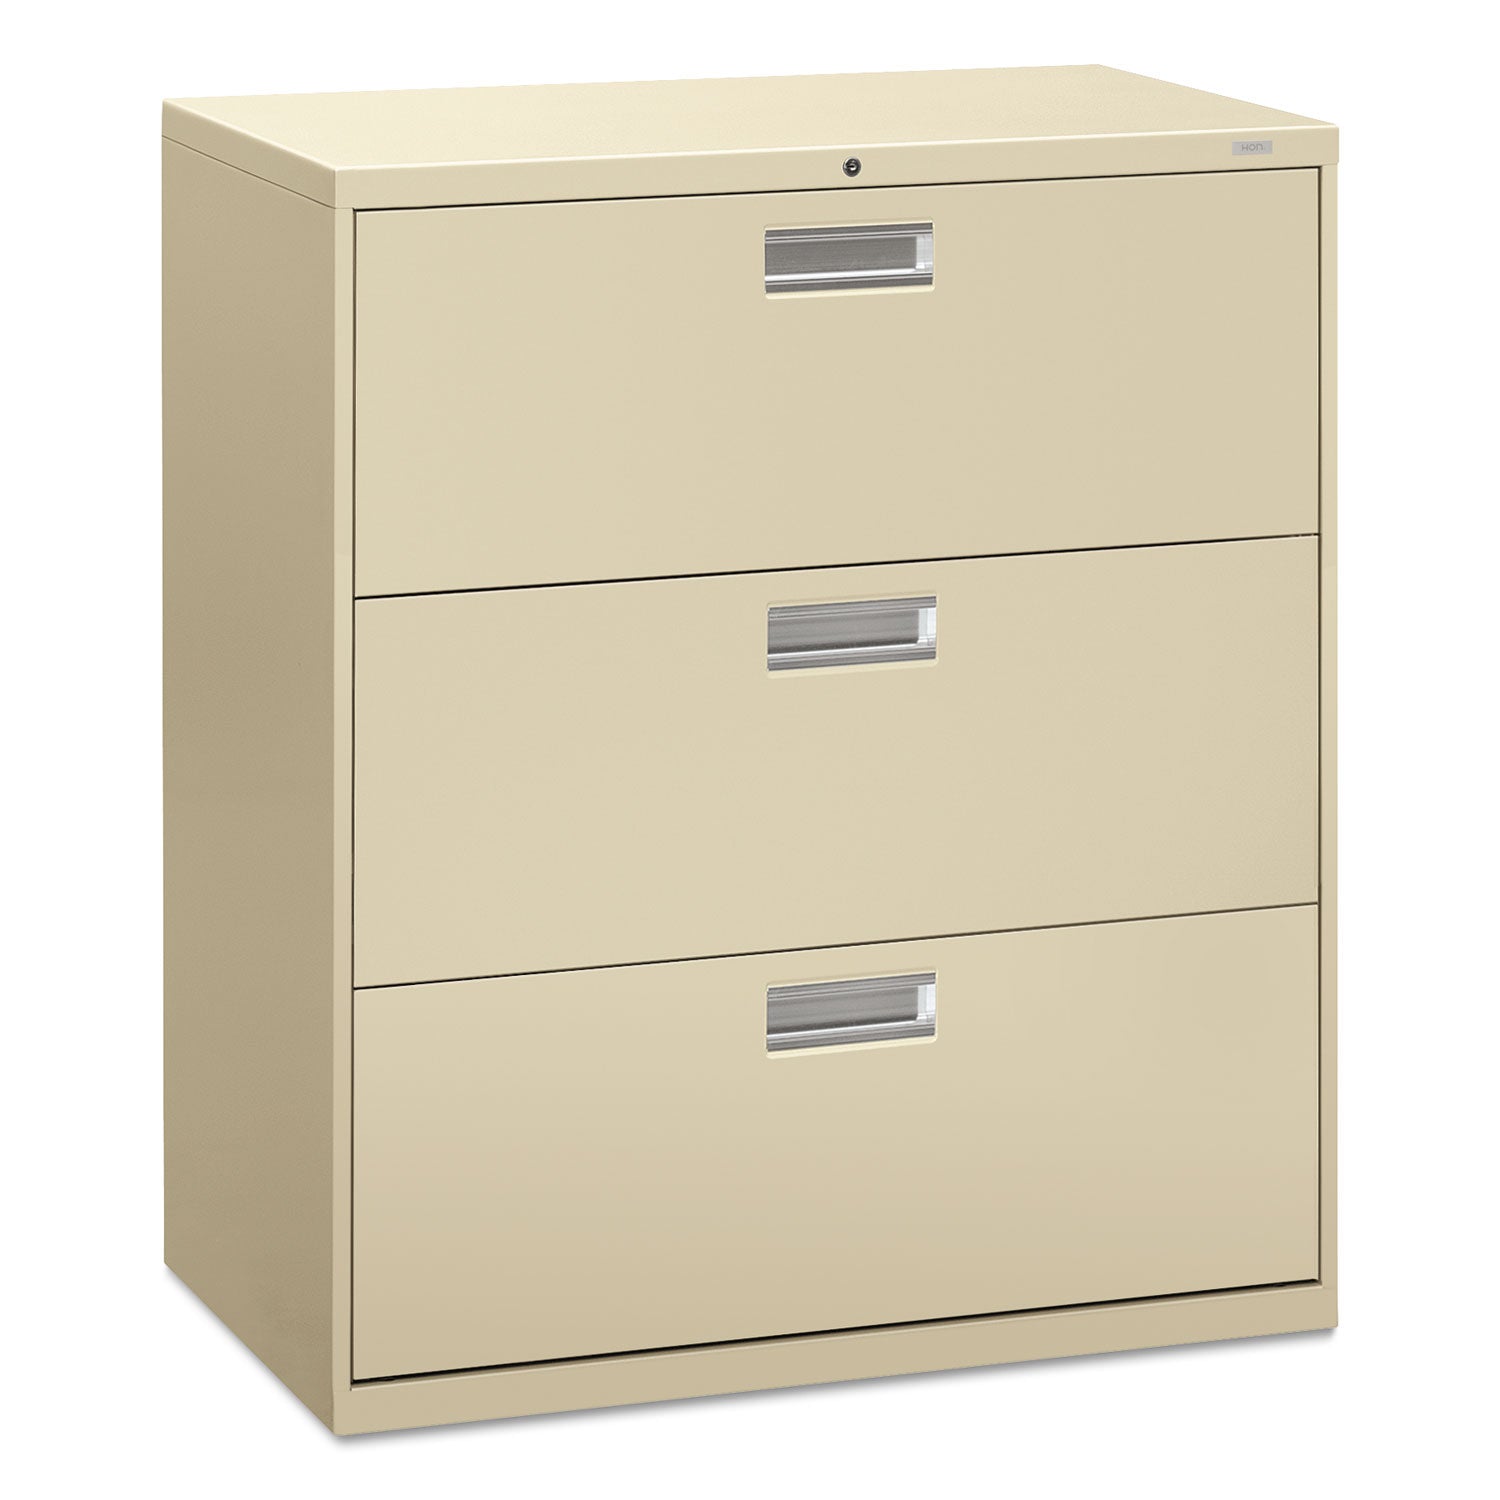 Brigade 600 Series Lateral File, 3 Legal/Letter-Size File Drawers, Putty, 36" x 18" x 39.13 - 